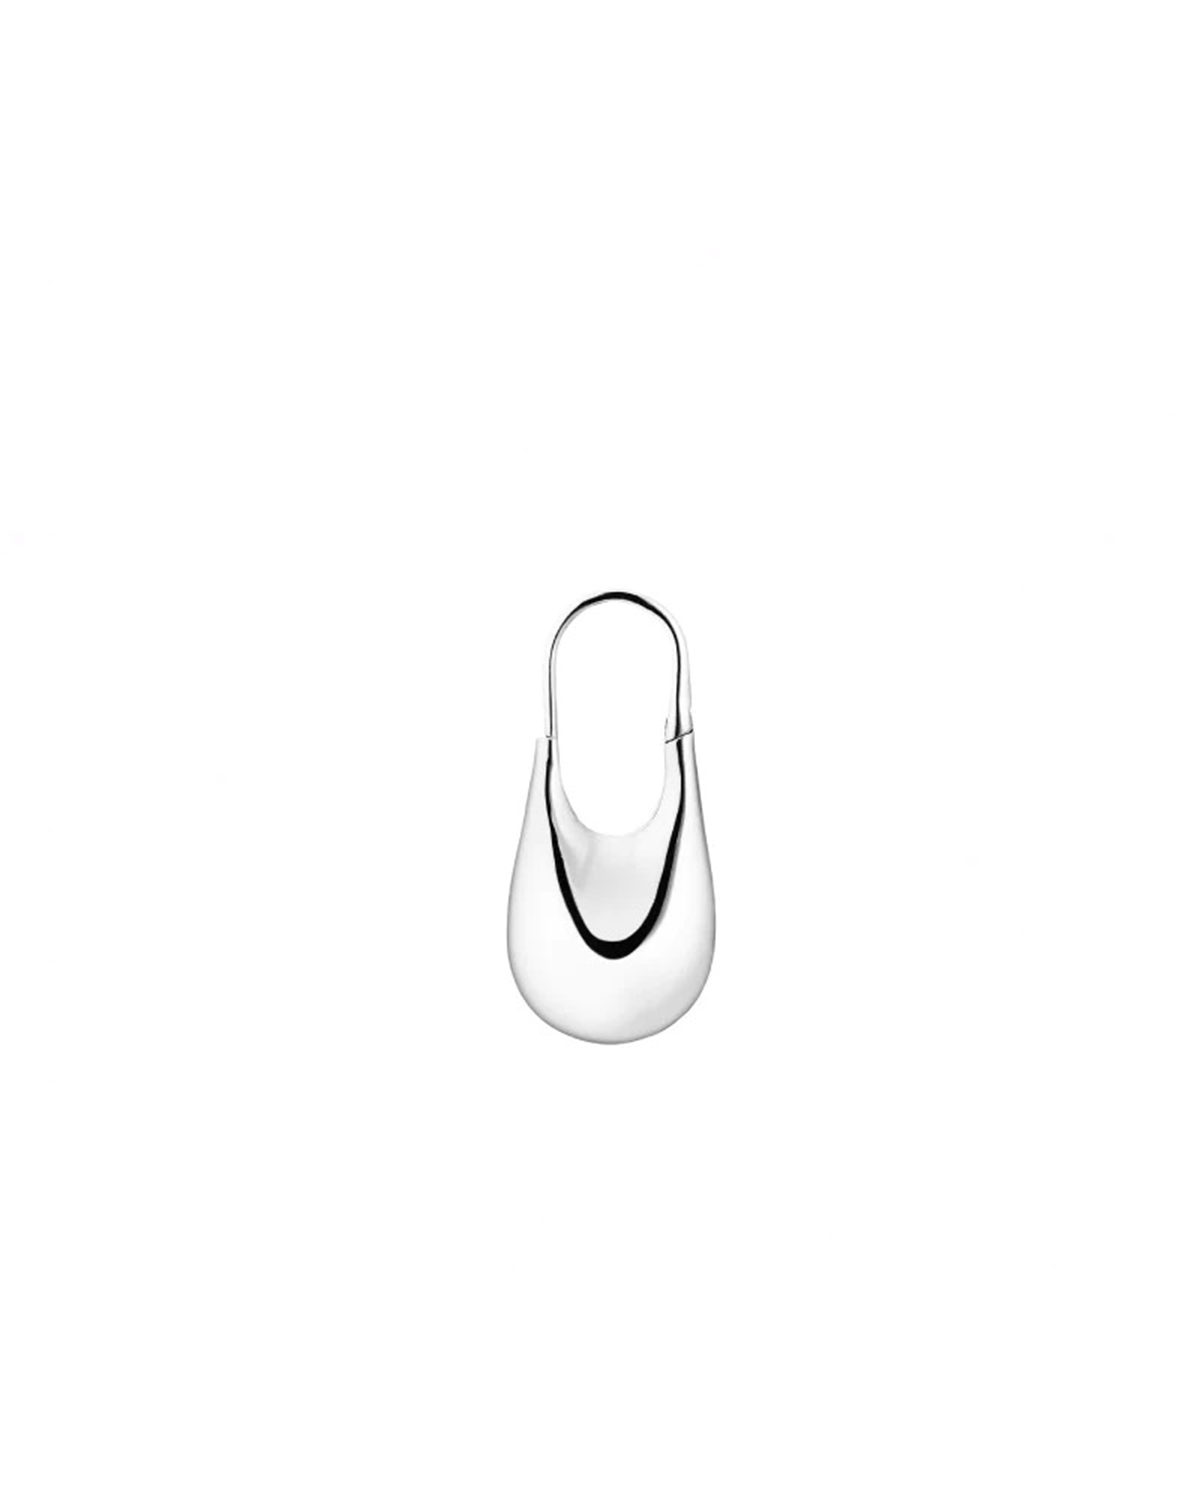 Doric Earring Small - Sterling Silver